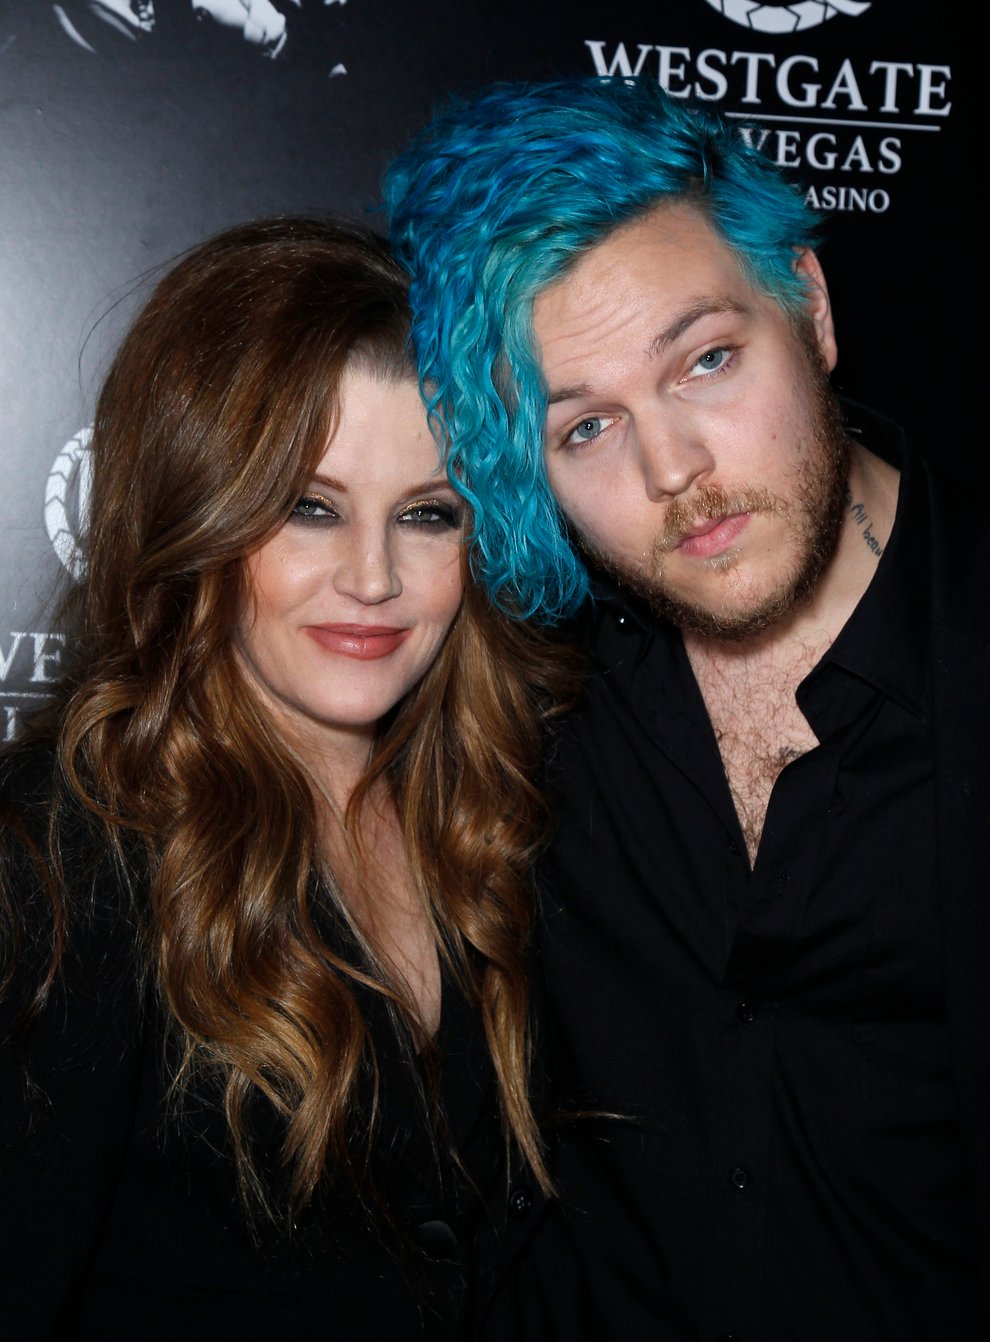 Lisa Marie Presley (left) pays emotional tribute to Benjamin Keough (right)